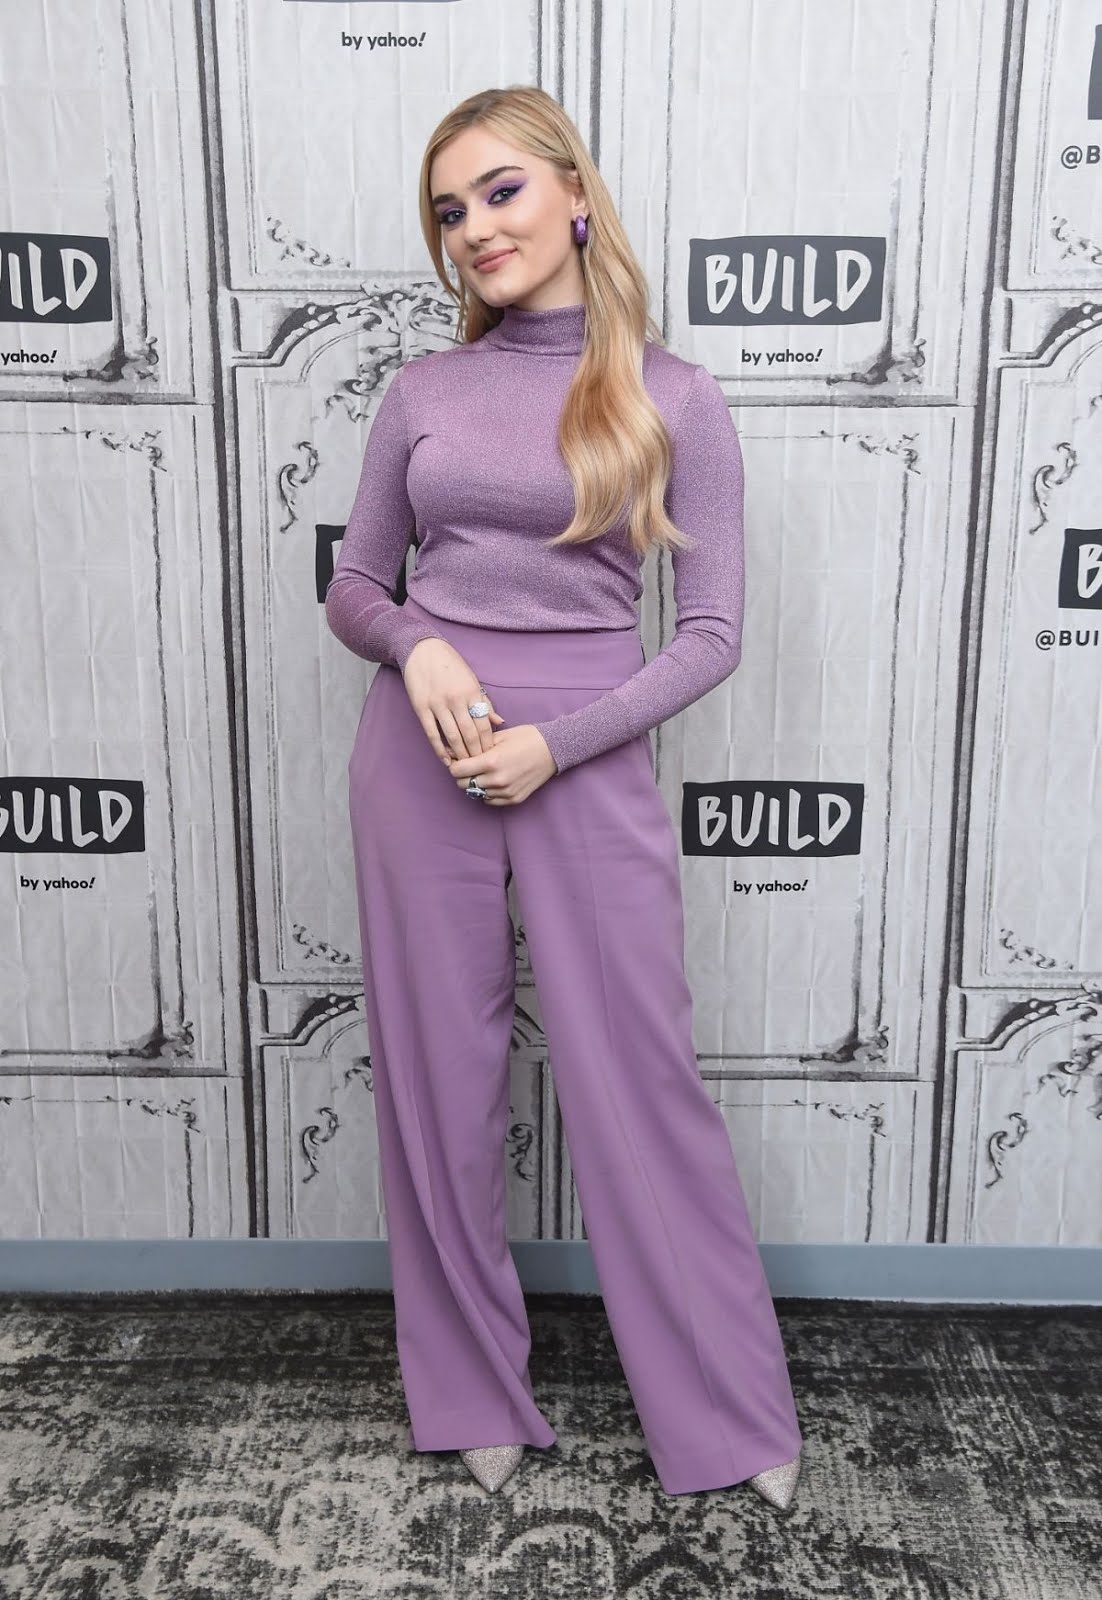 Meg Donnelly showoff boobs at Build Series For Zombies 2 In New York - Top 10 Ranker